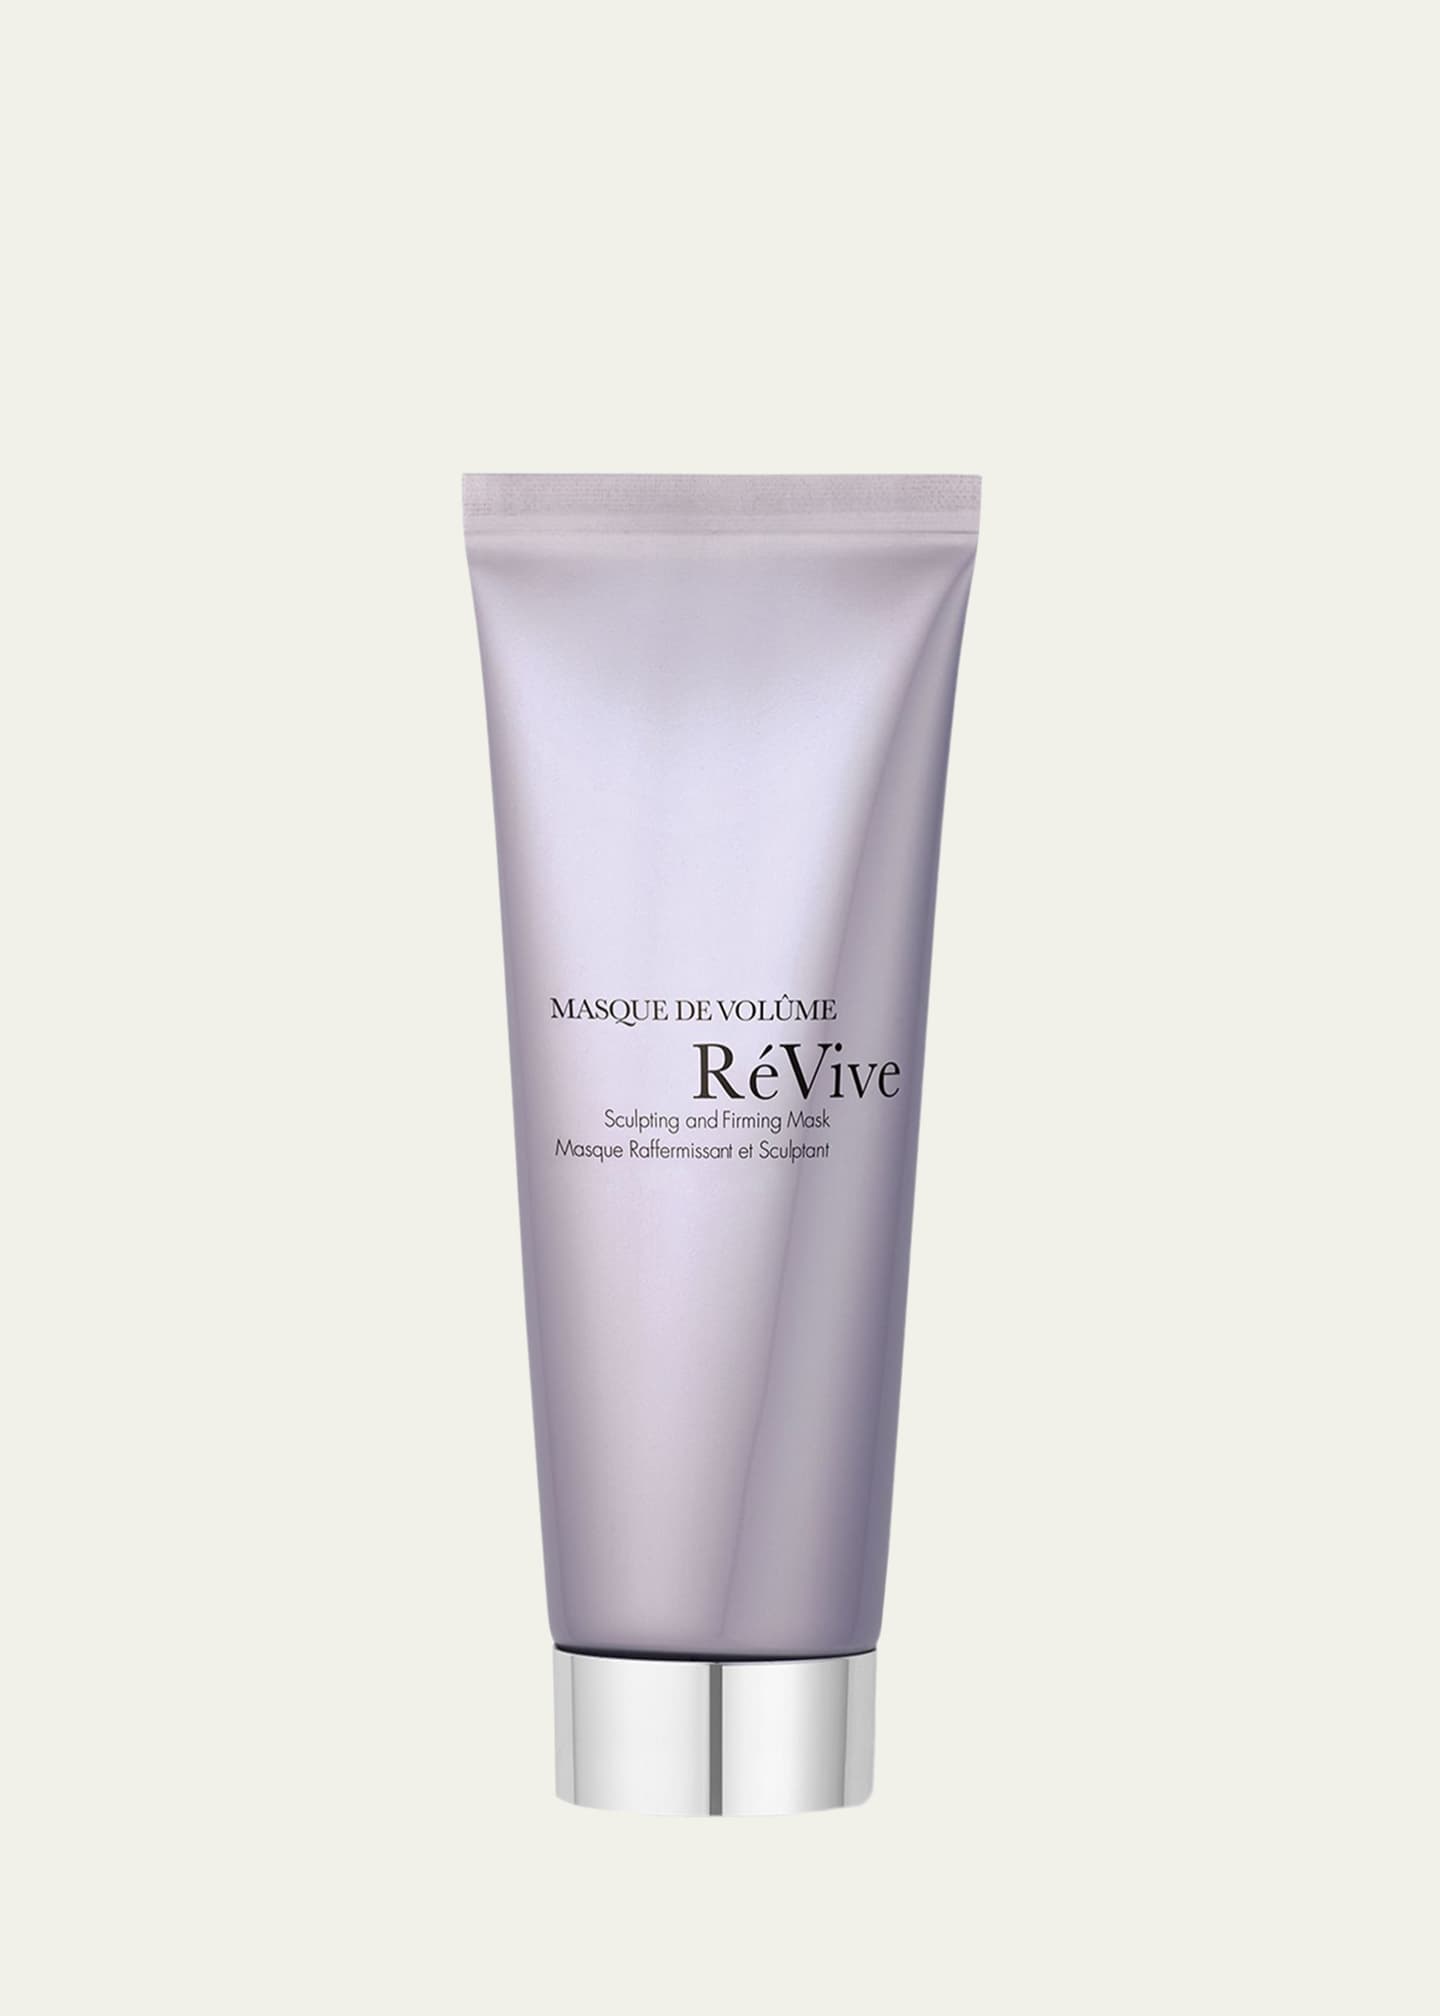 ReVive Masque de Volume Sculpting and Firming Mask, 2.5 oz. Image 1 of 2